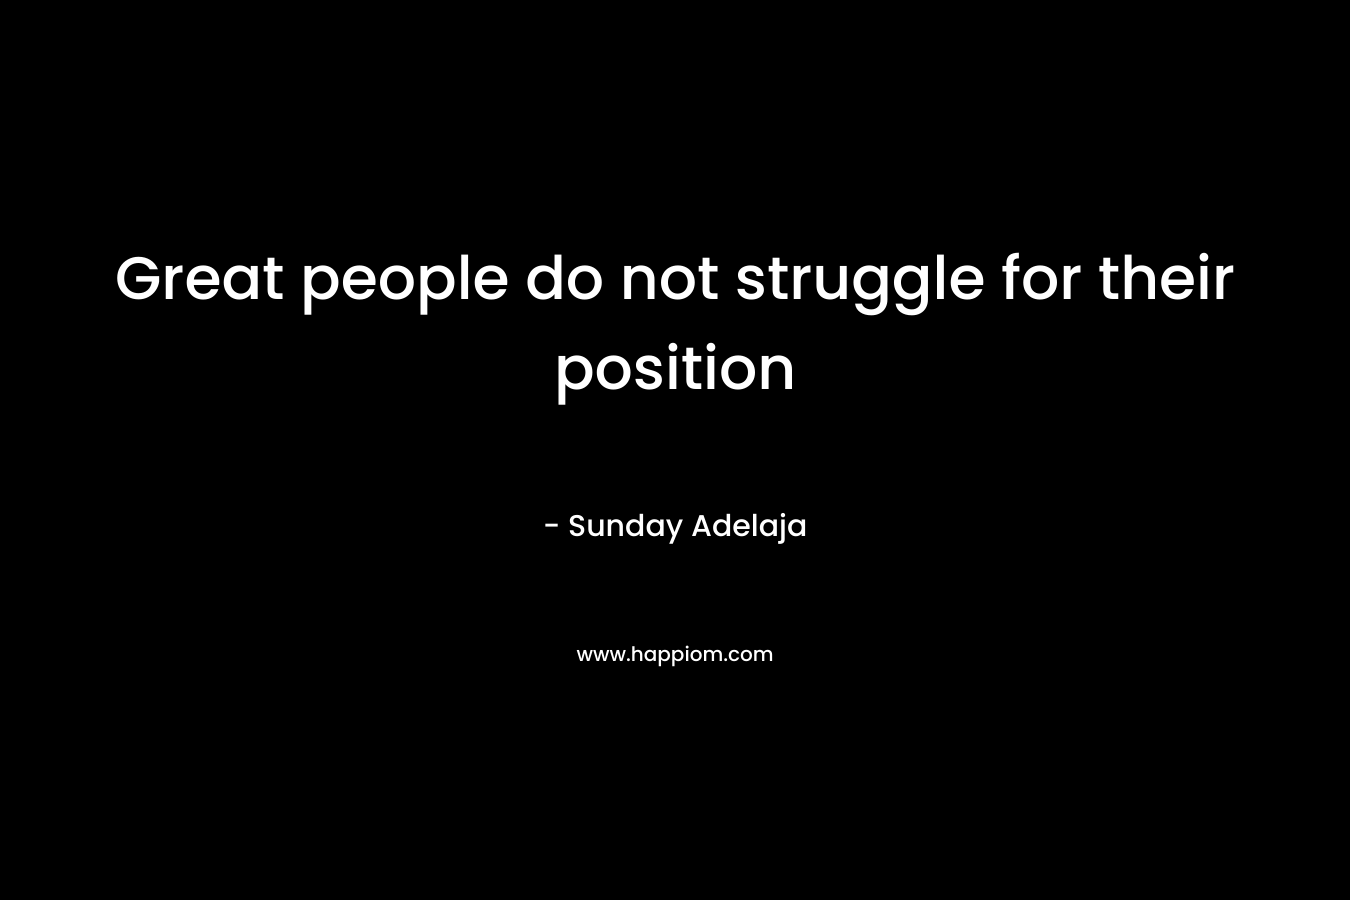 Great people do not struggle for their position